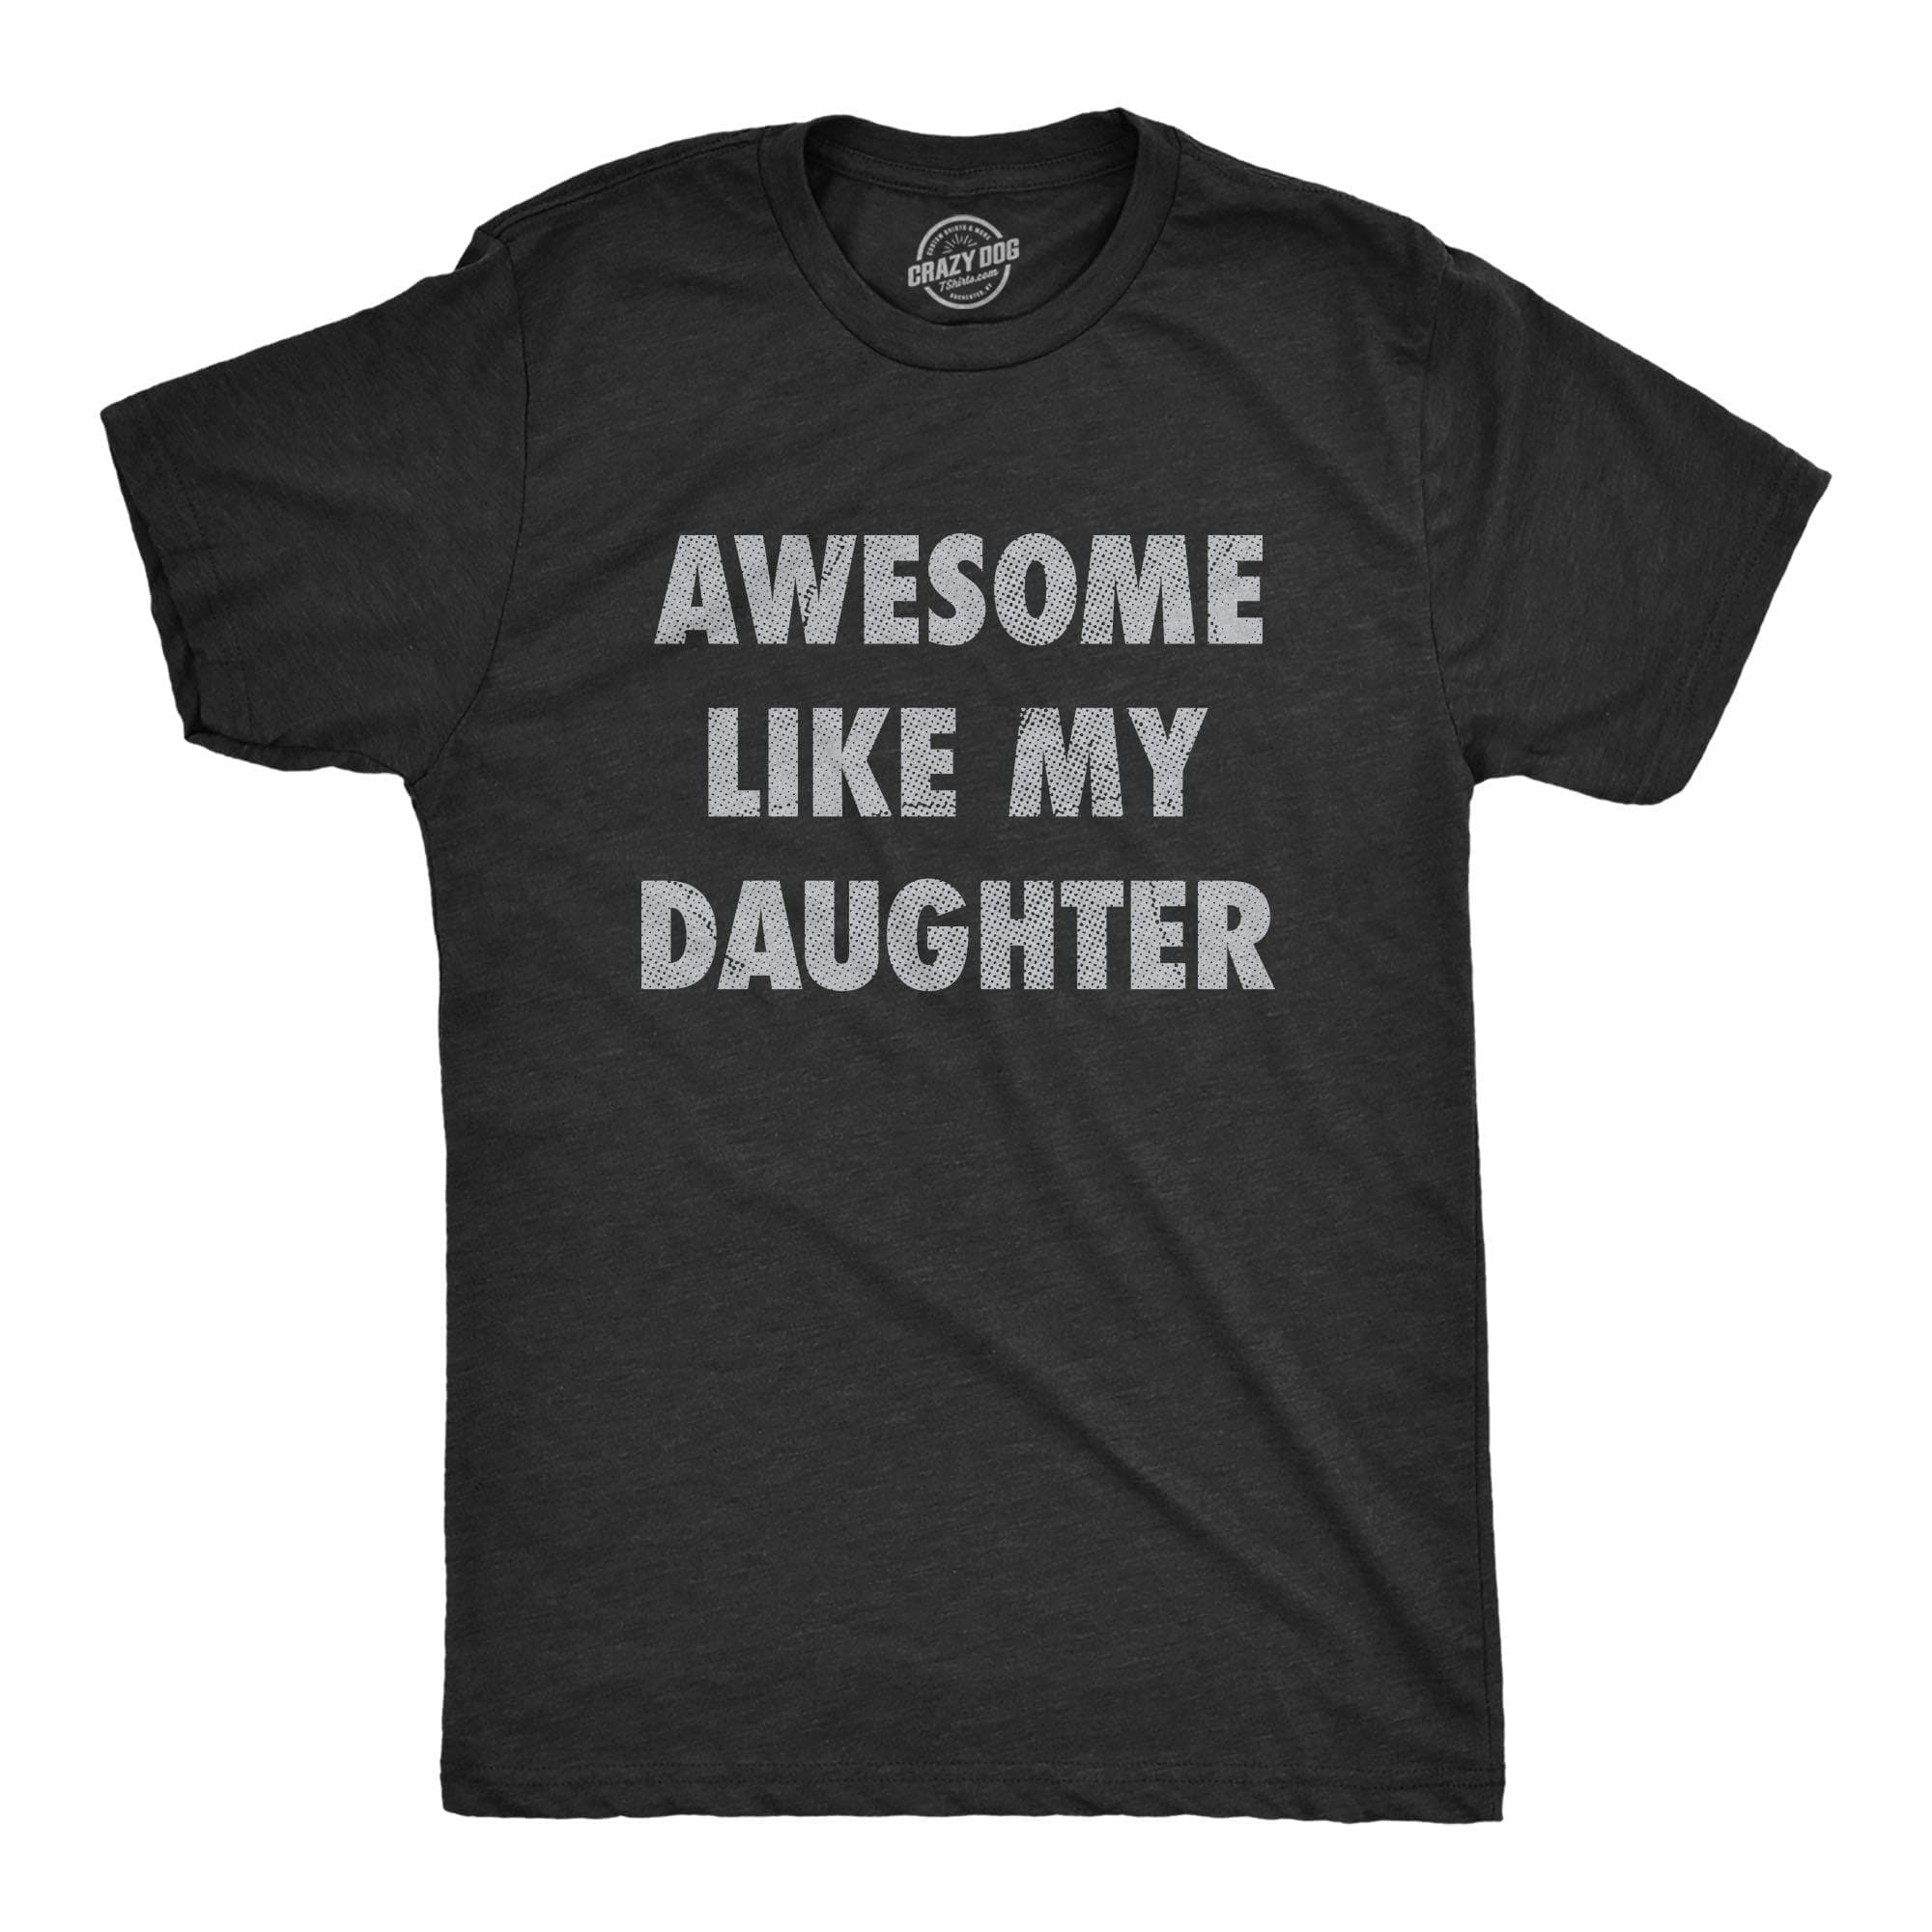 Awesome Like My Daughter Men's Tshirt - Crazy Dog T-Shirts